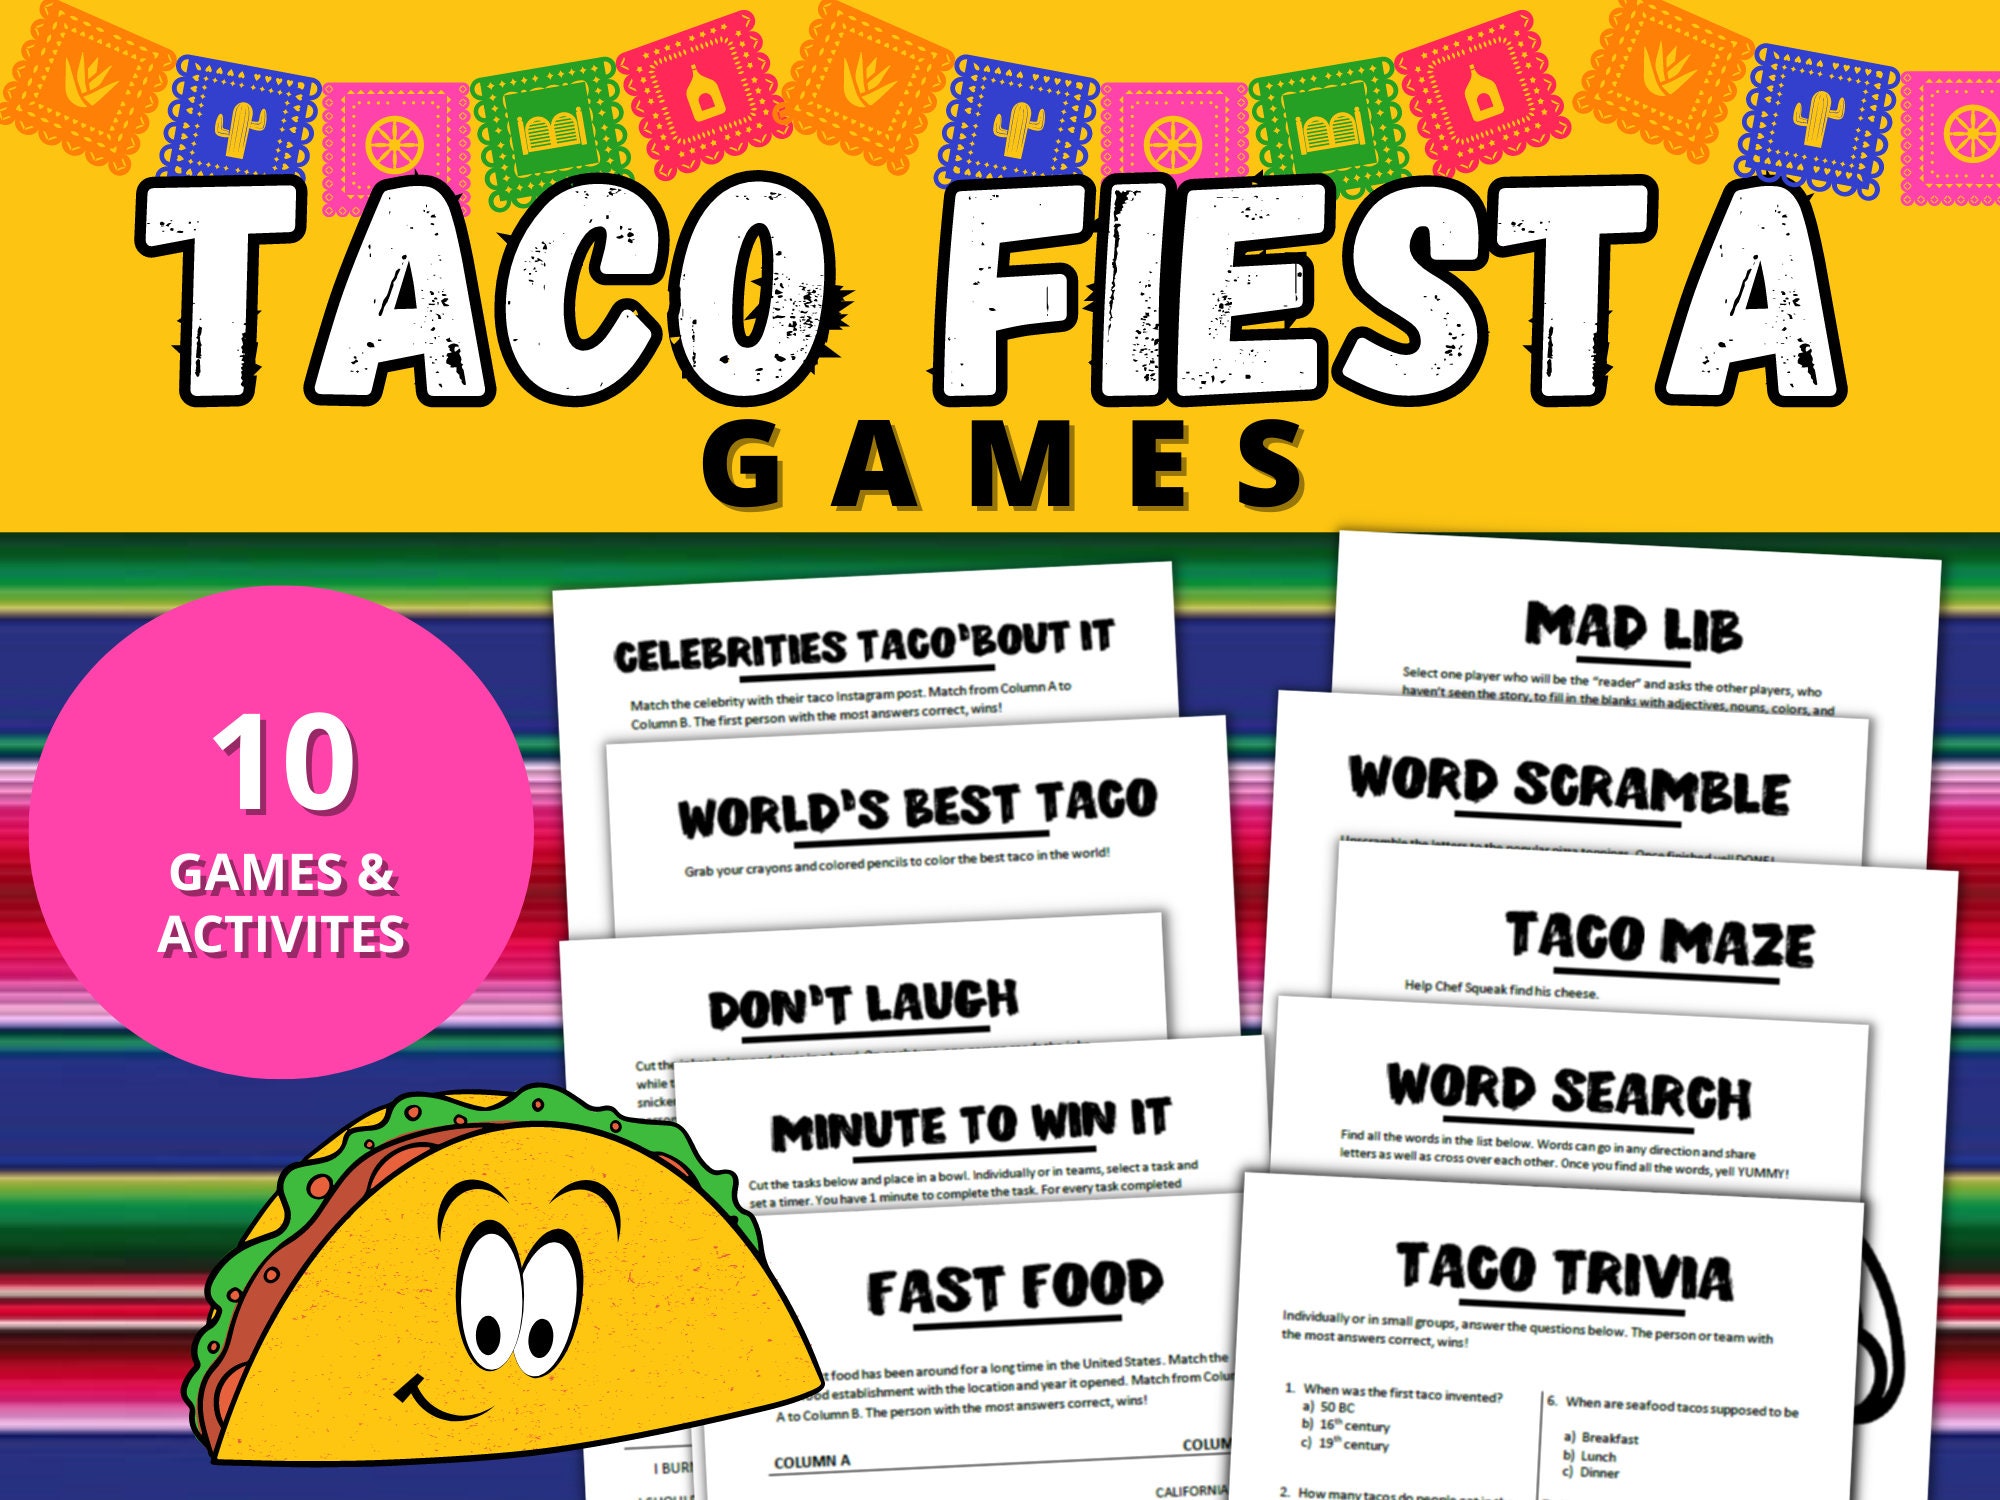 Make Spanish Class Competitive and Fun: How to play Taco Tuesday